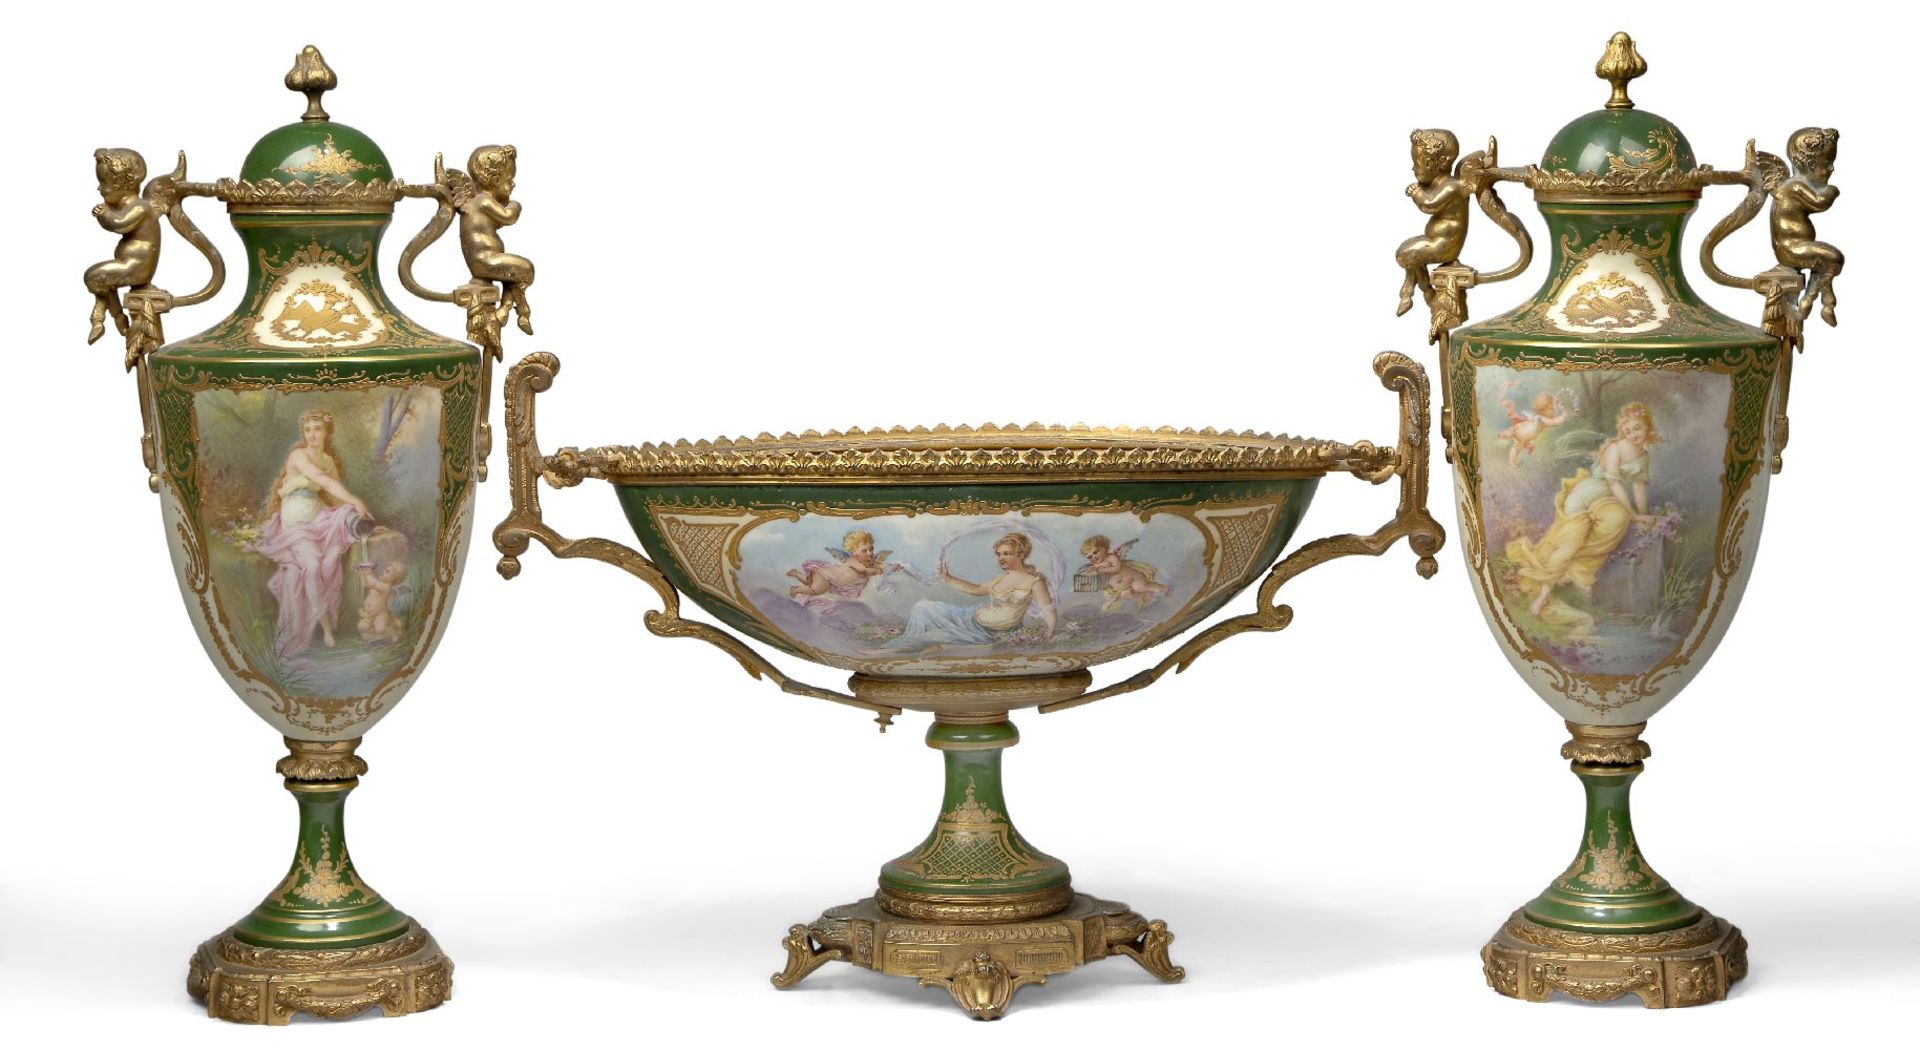 A gilt-bronze mounted Serves-style porcelain composite garniture, early 20th century, comprising two